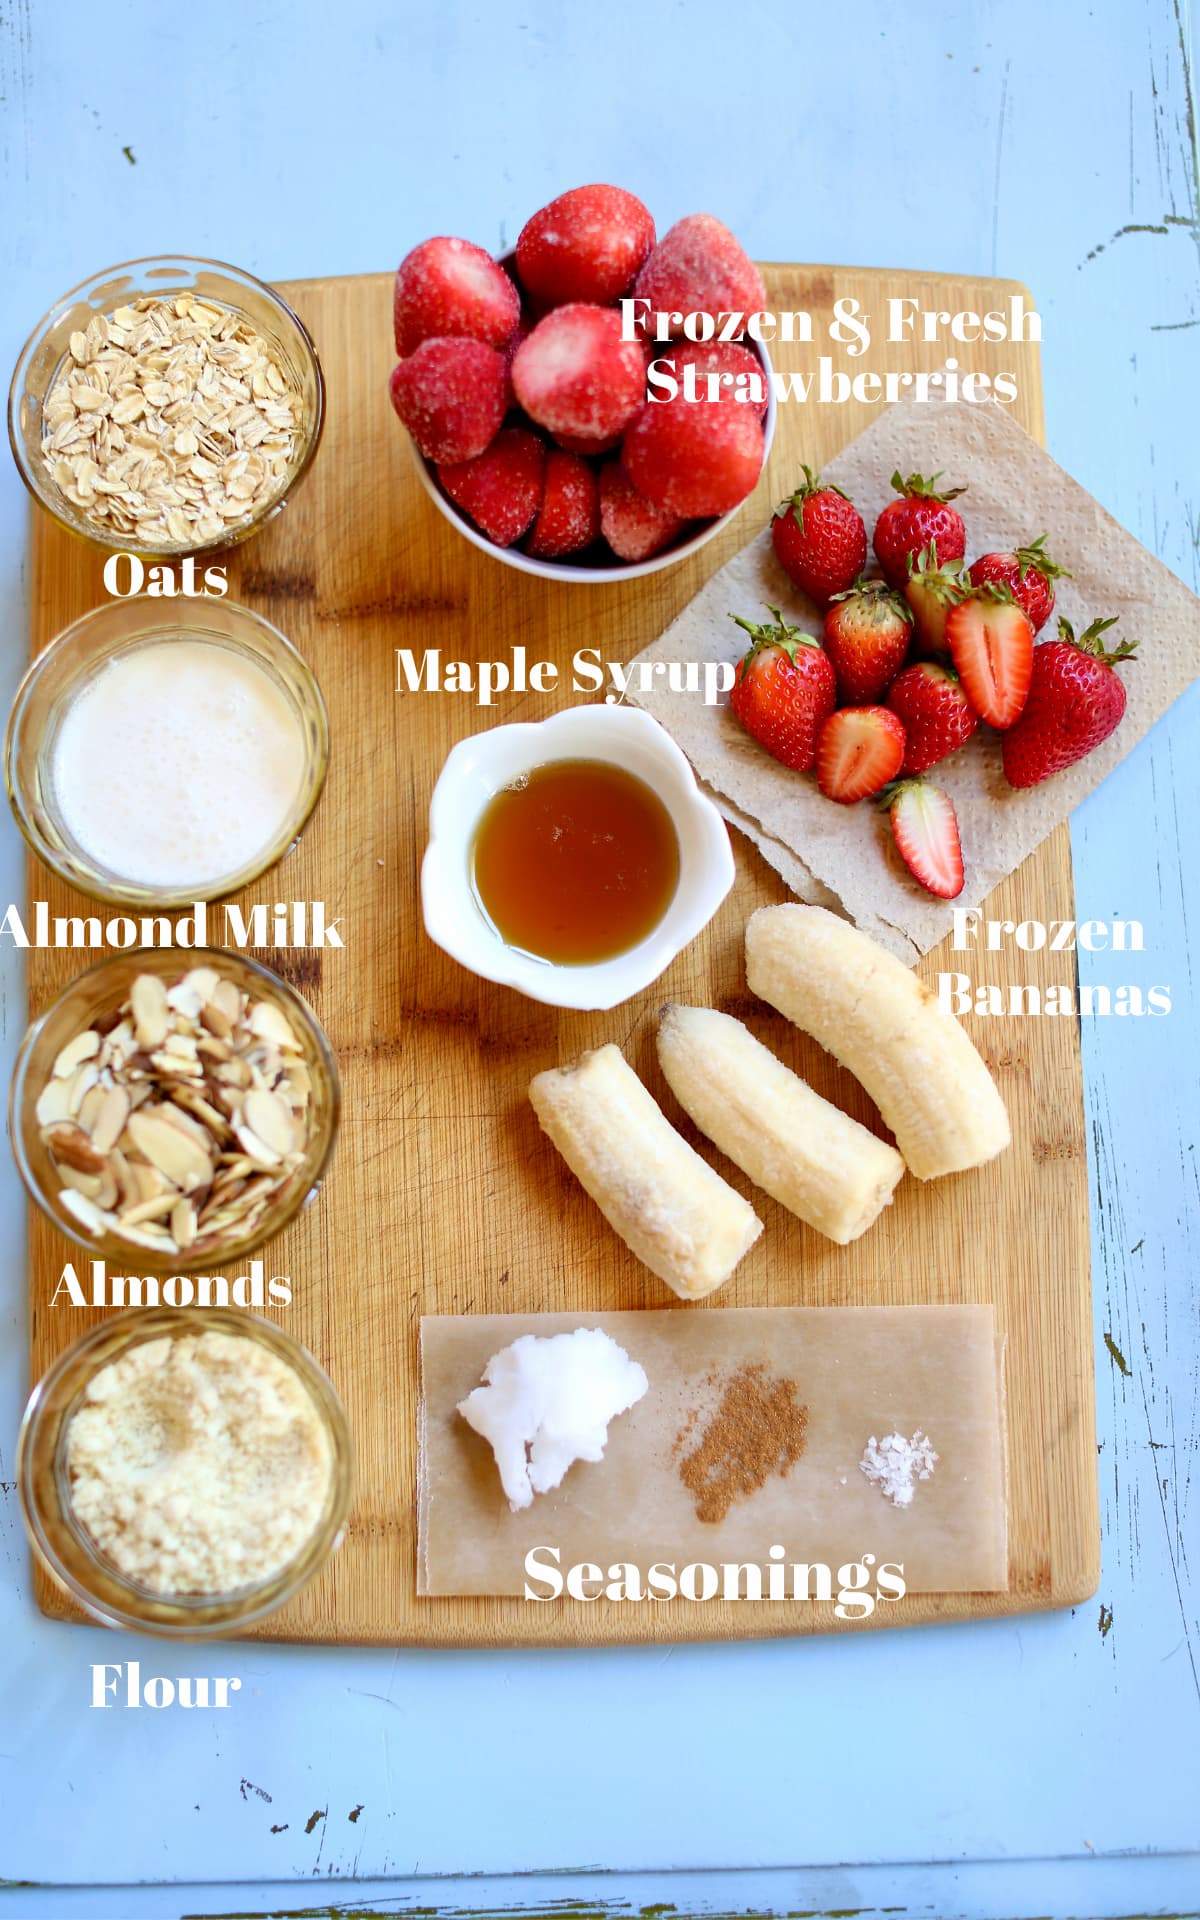 ingredients for a smoothies, bananas, maple syrup, strawberries fresh and frozen. almond milk, almonds, oatmeal.